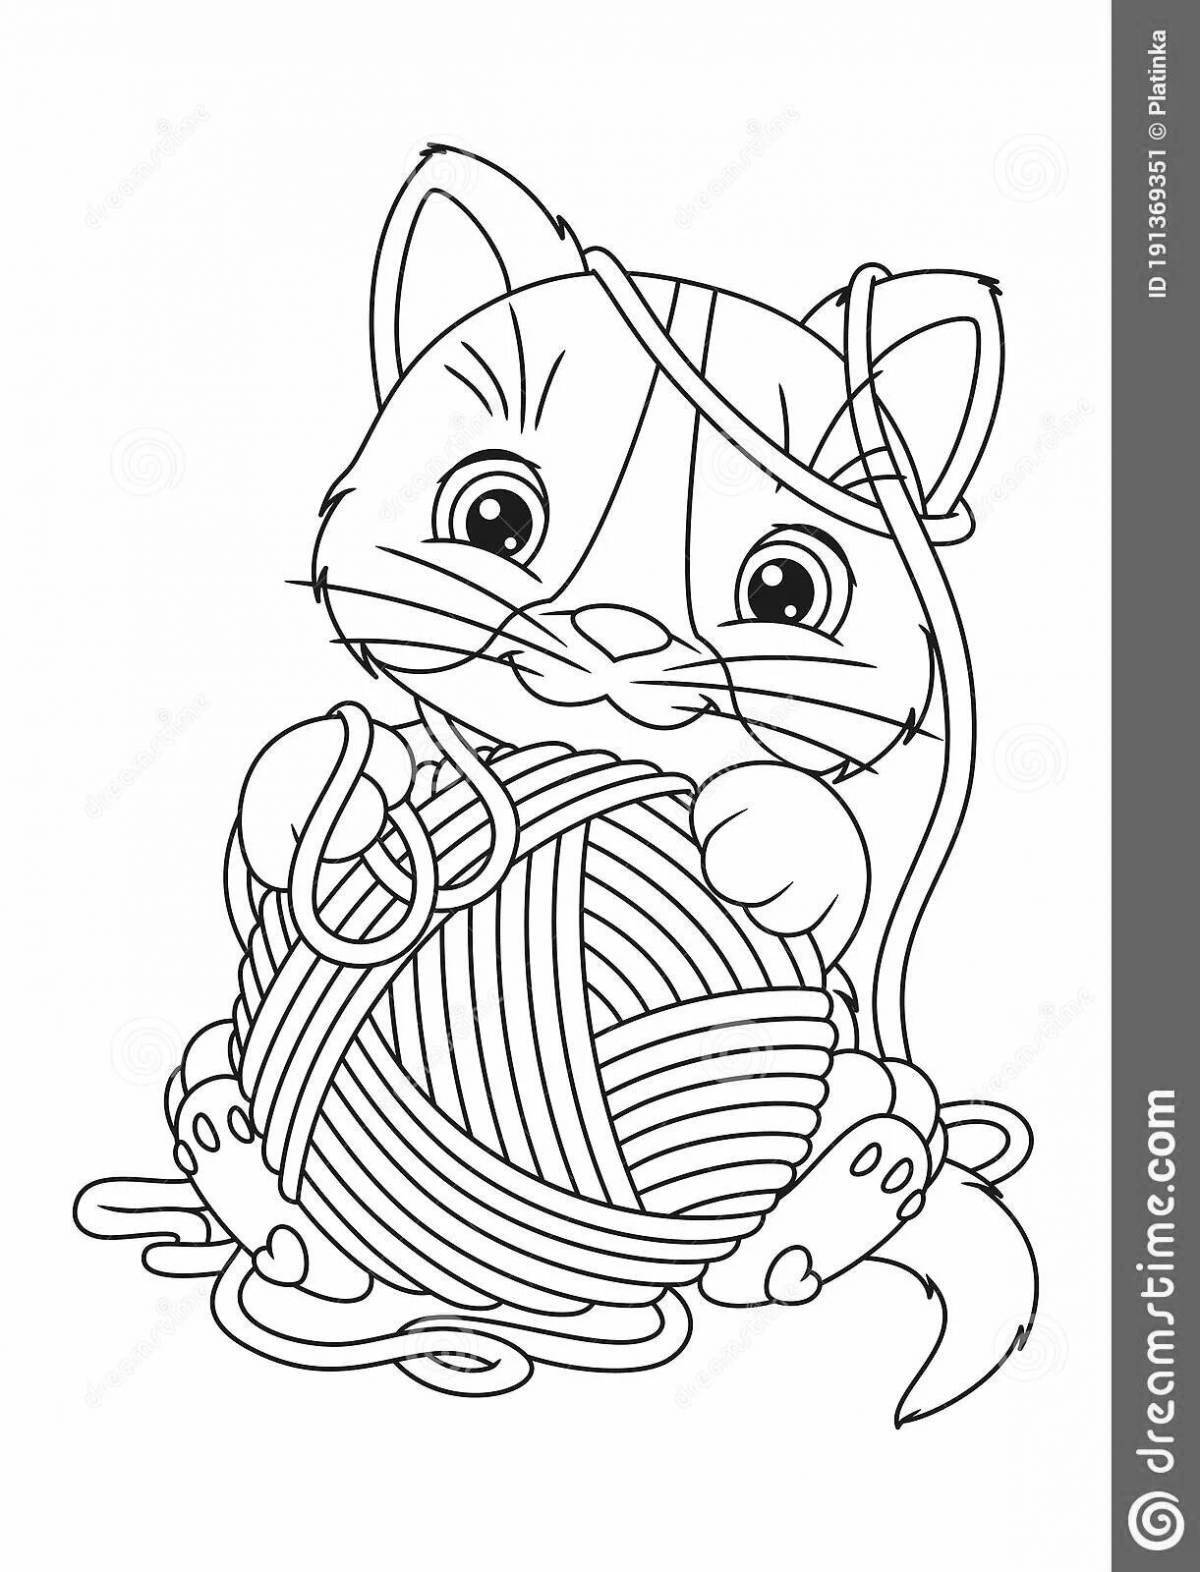 Coloring page energetic cat with a ball